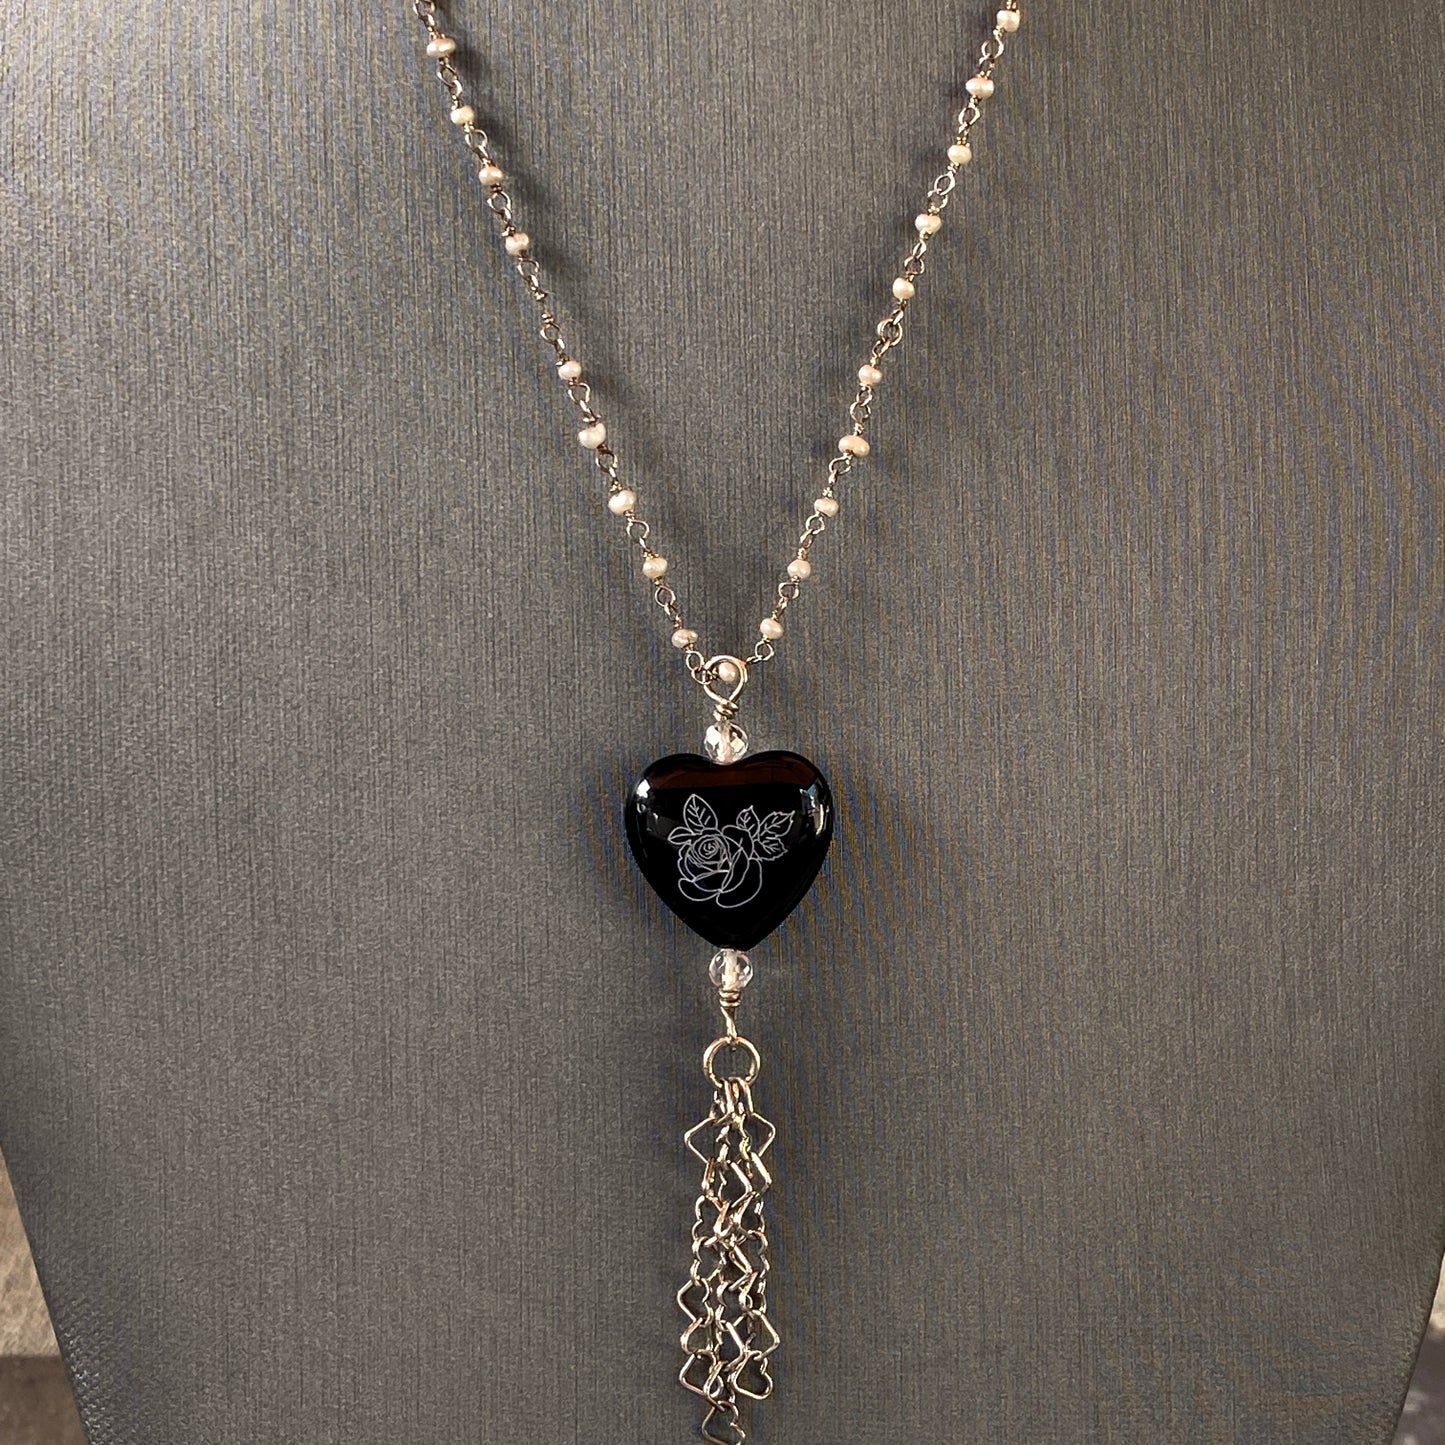 Sterling silver with freshwater pearls, painted onyx pendant, white topaz, hanging heart chain